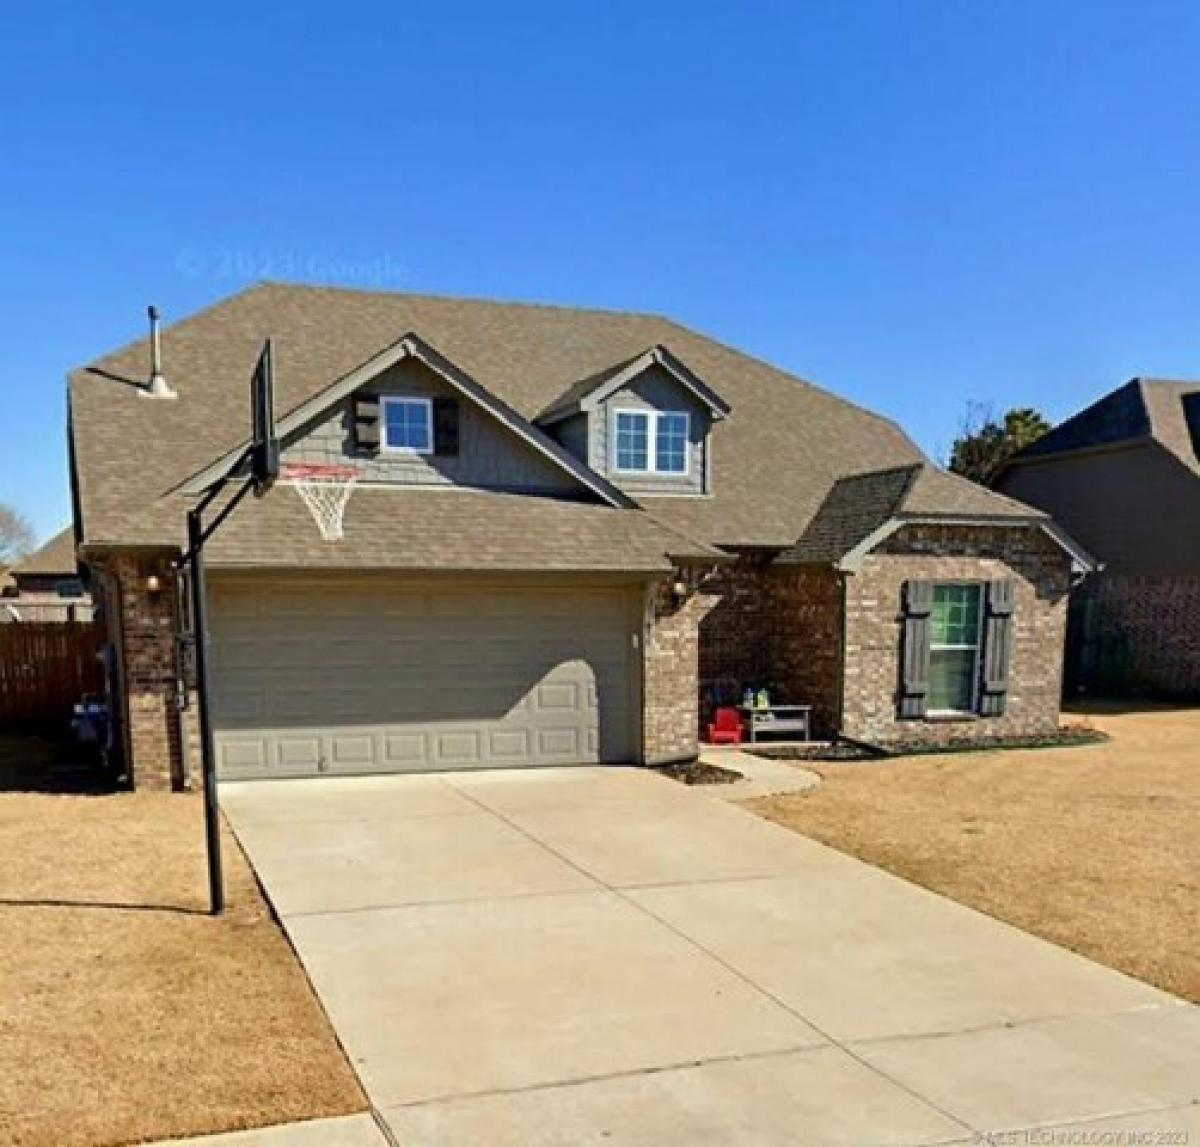 Picture of Home For Sale in Glenpool, Oklahoma, United States